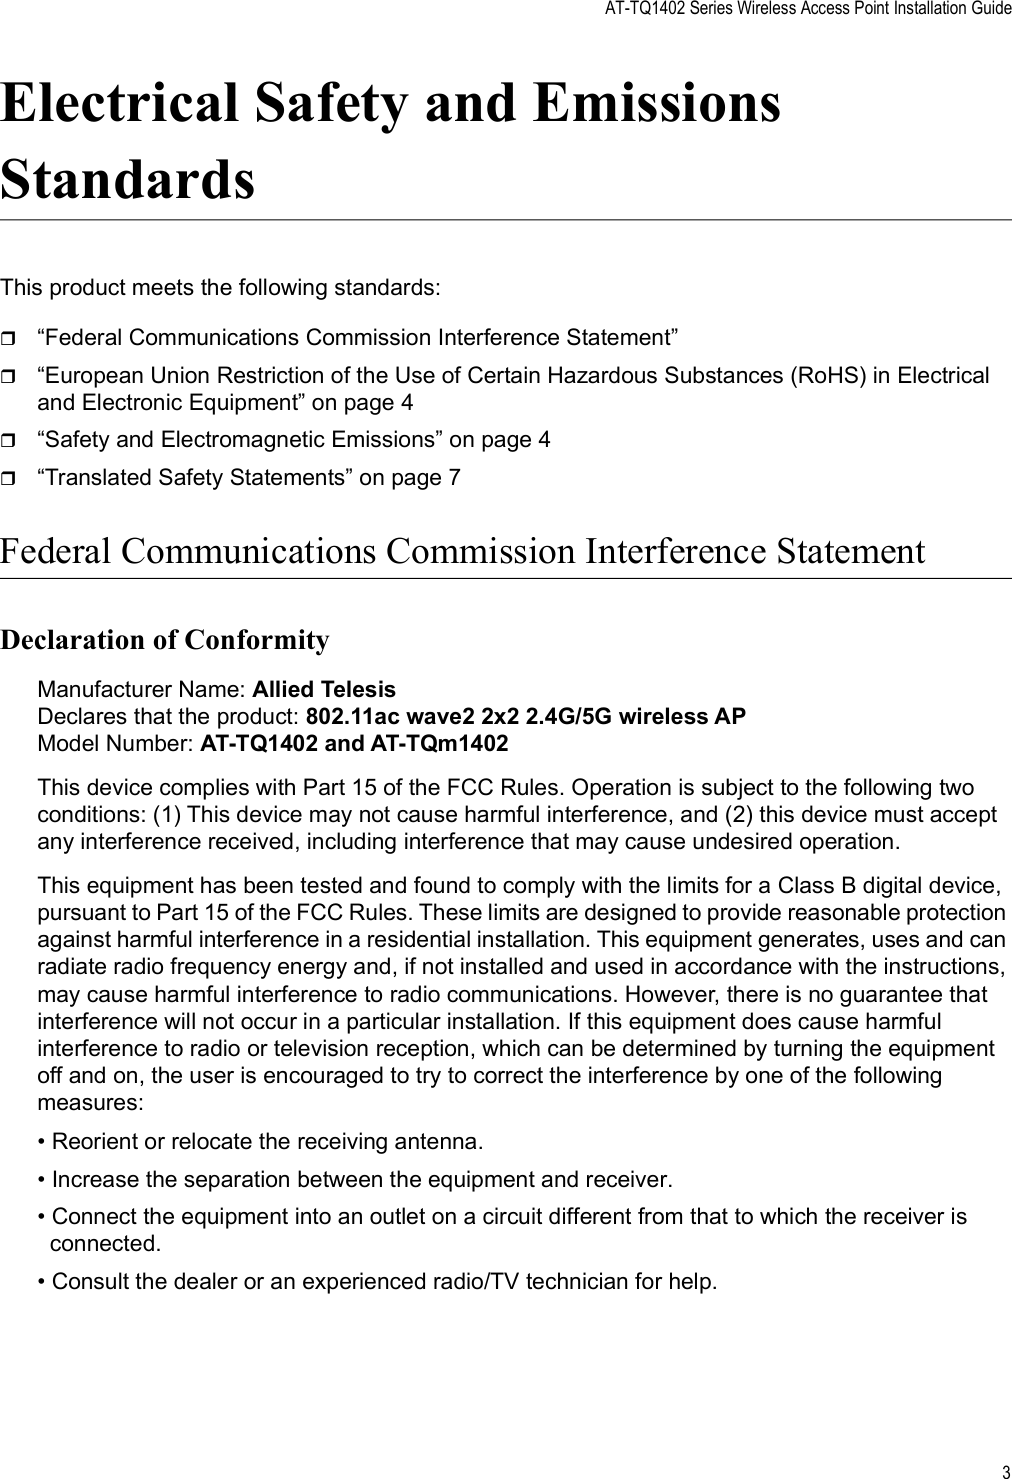 AT-TQ1402 Series Wireless Access Point Installation Guide3Electrical Safety and Emissions StandardsThis product meets the following standards:“Federal Communications Commission Interference Statement” “European Union Restriction of the Use of Certain Hazardous Substances (RoHS) in Electrical and Electronic Equipment” on page 4“Safety and Electromagnetic Emissions” on page 4“Translated Safety Statements” on page 7Federal Communications Commission Interference StatementDeclaration of ConformityManufacturer Name: Allied TelesisDeclares that the product: 802.11ac wave2 2x2 2.4G/5G wireless APModel Number: AT-TQ1402 and AT-TQm1402This device complies with Part 15 of the FCC Rules. Operation is subject to the following two conditions: (1) This device may not cause harmful interference, and (2) this device must accept any interference received, including interference that may cause undesired operation.This equipment has been tested and found to comply with the limits for a Class B digital device, pursuant to Part 15 of the FCC Rules. These limits are designed to provide reasonable protection against harmful interference in a residential installation. This equipment generates, uses and can radiate radio frequency energy and, if not installed and used in accordance with the instructions, may cause harmful interference to radio communications. However, there is no guarantee that interference will not occur in a particular installation. If this equipment does cause harmful interference to radio or television reception, which can be determined by turning the equipment off and on, the user is encouraged to try to correct the interference by one of the following measures:• Reorient or relocate the receiving antenna.• Increase the separation between the equipment and receiver.• Connect the equipment into an outlet on a circuit different from that to which the receiver is connected.• Consult the dealer or an experienced radio/TV technician for help.